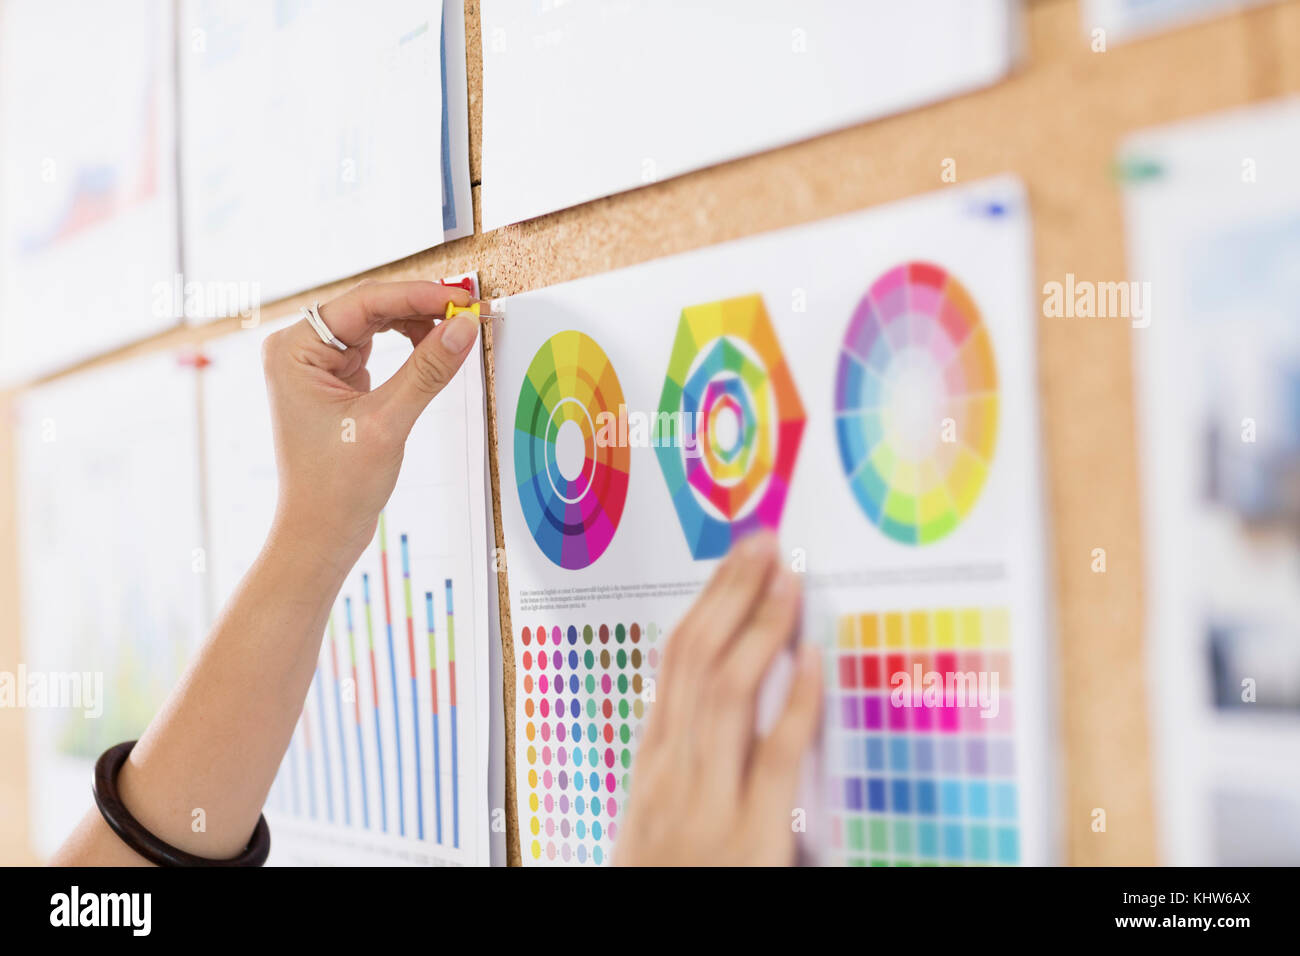 Woman pinning up colour charts and graphs Stock Photo